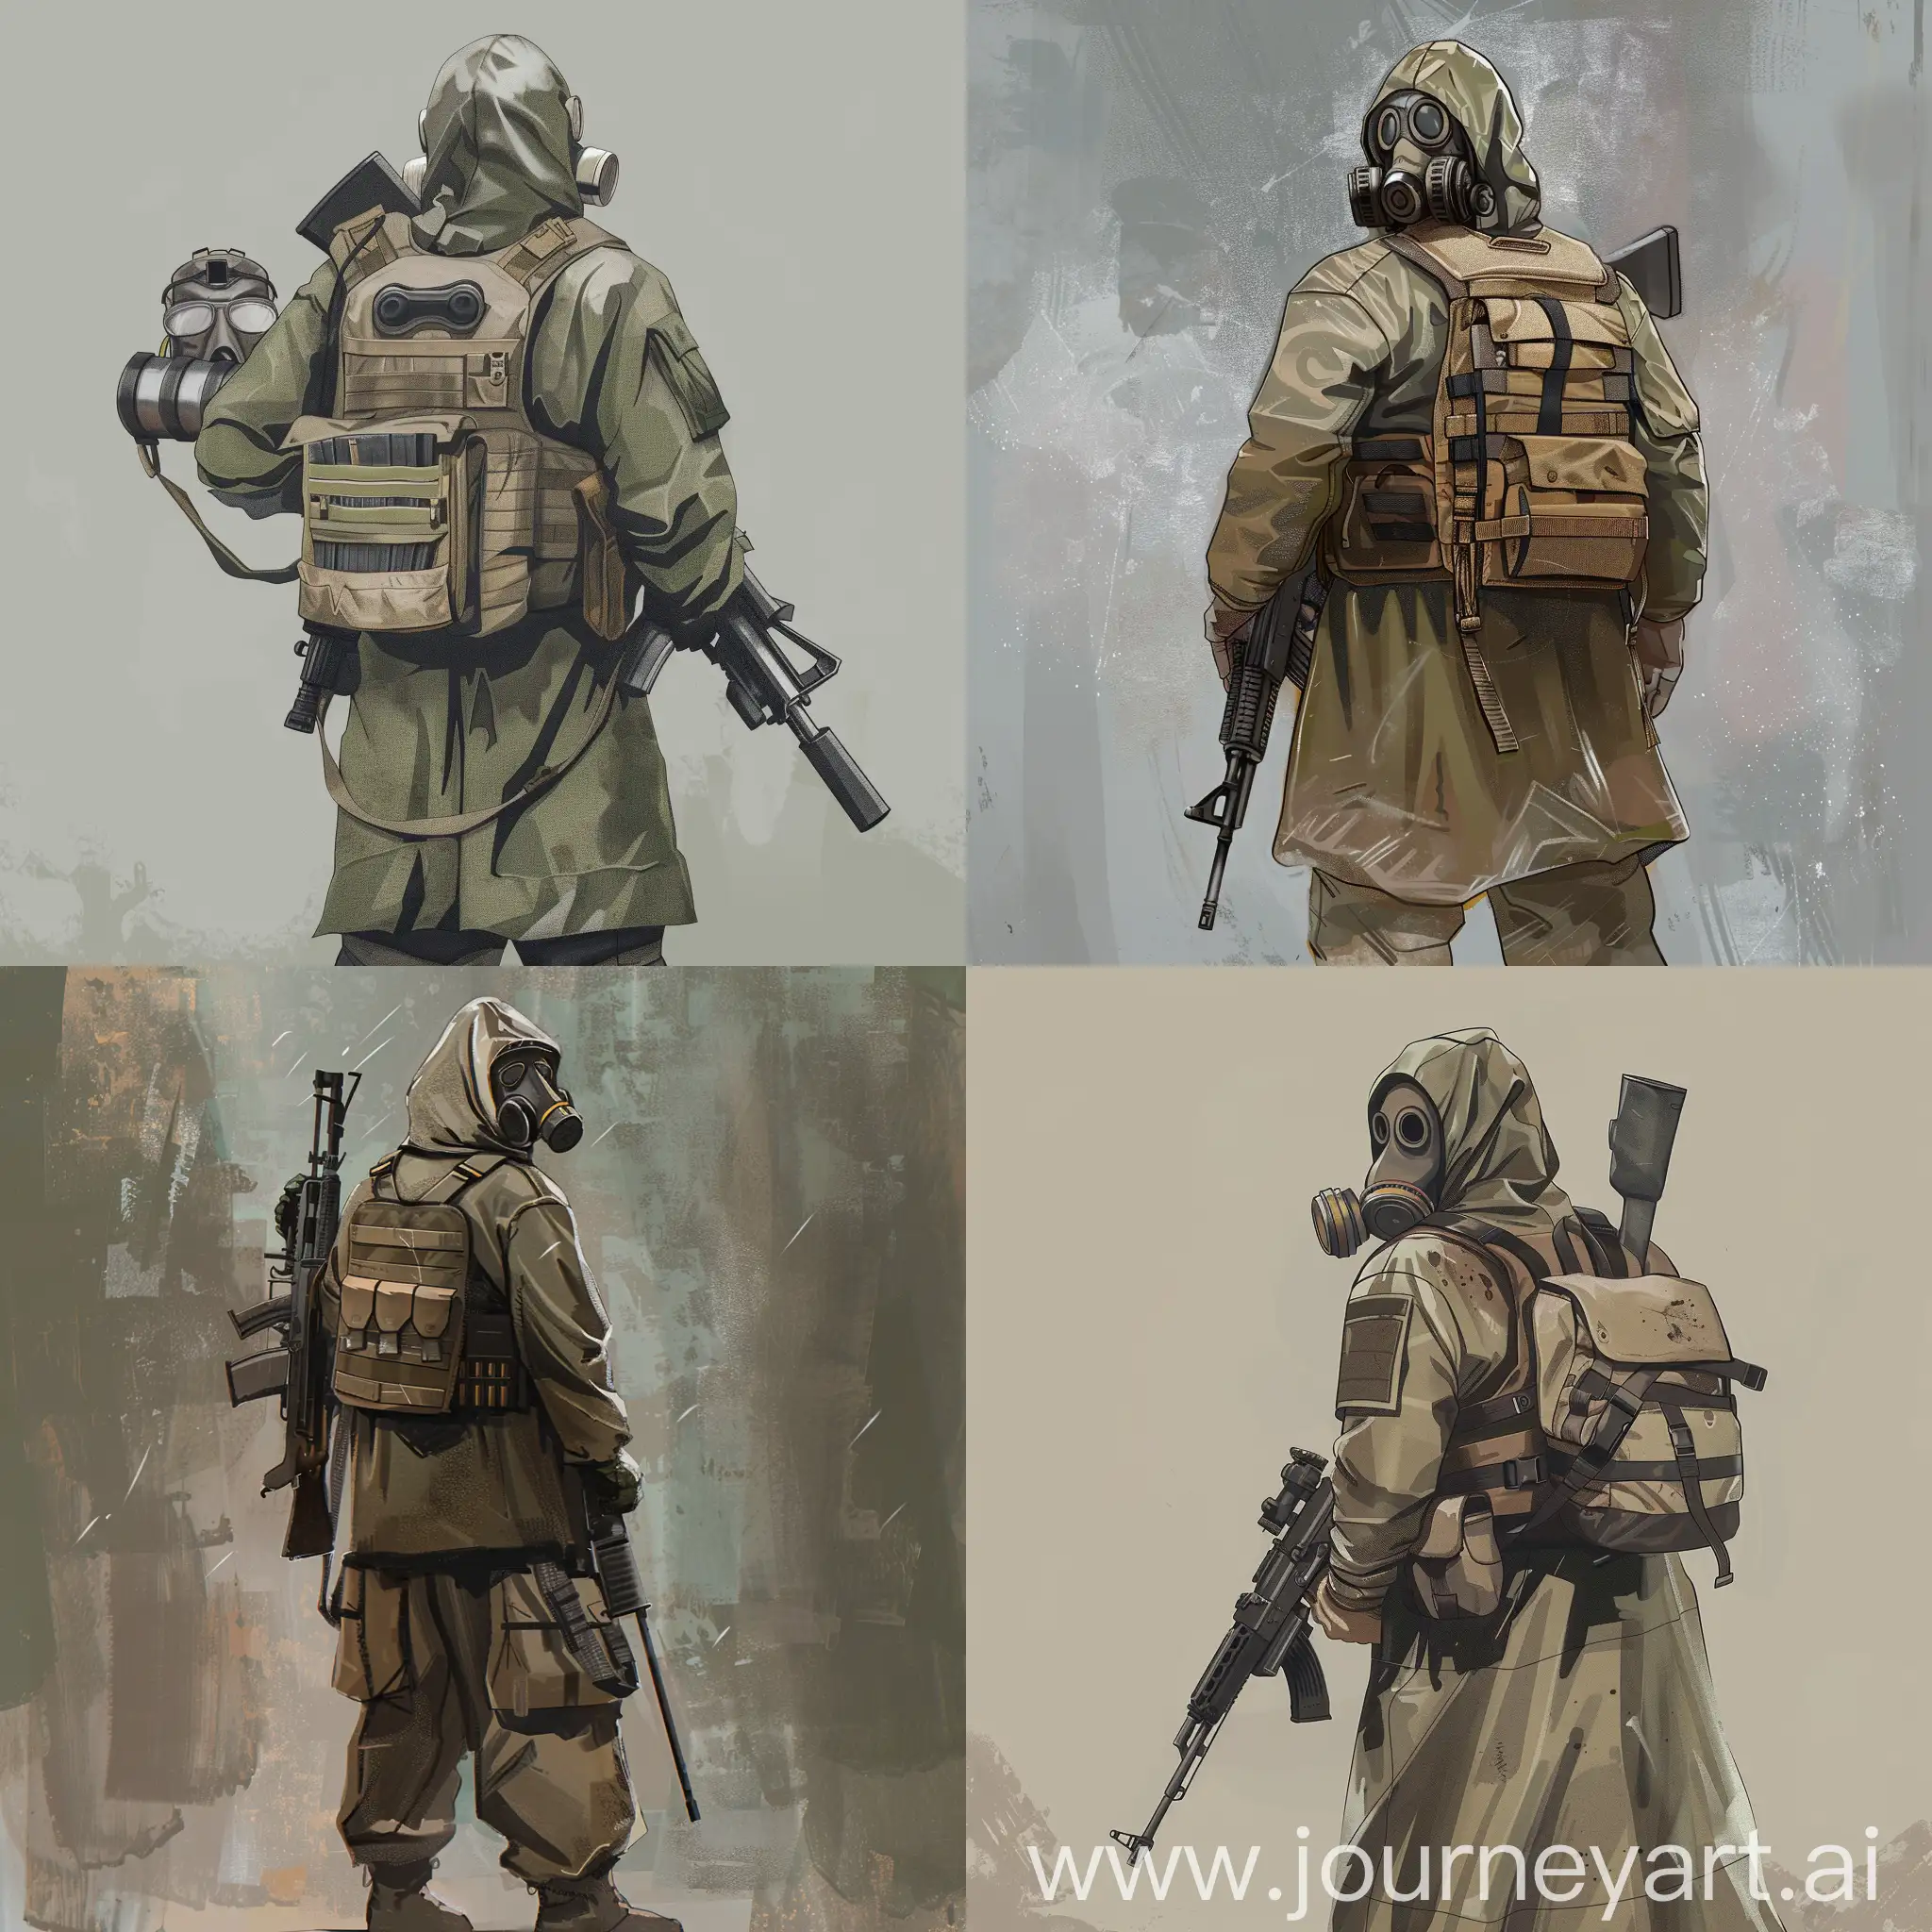 Soviet-Soldier-in-Hazmat-Raincoat-with-Gas-Mask-and-Sniper-Rifle